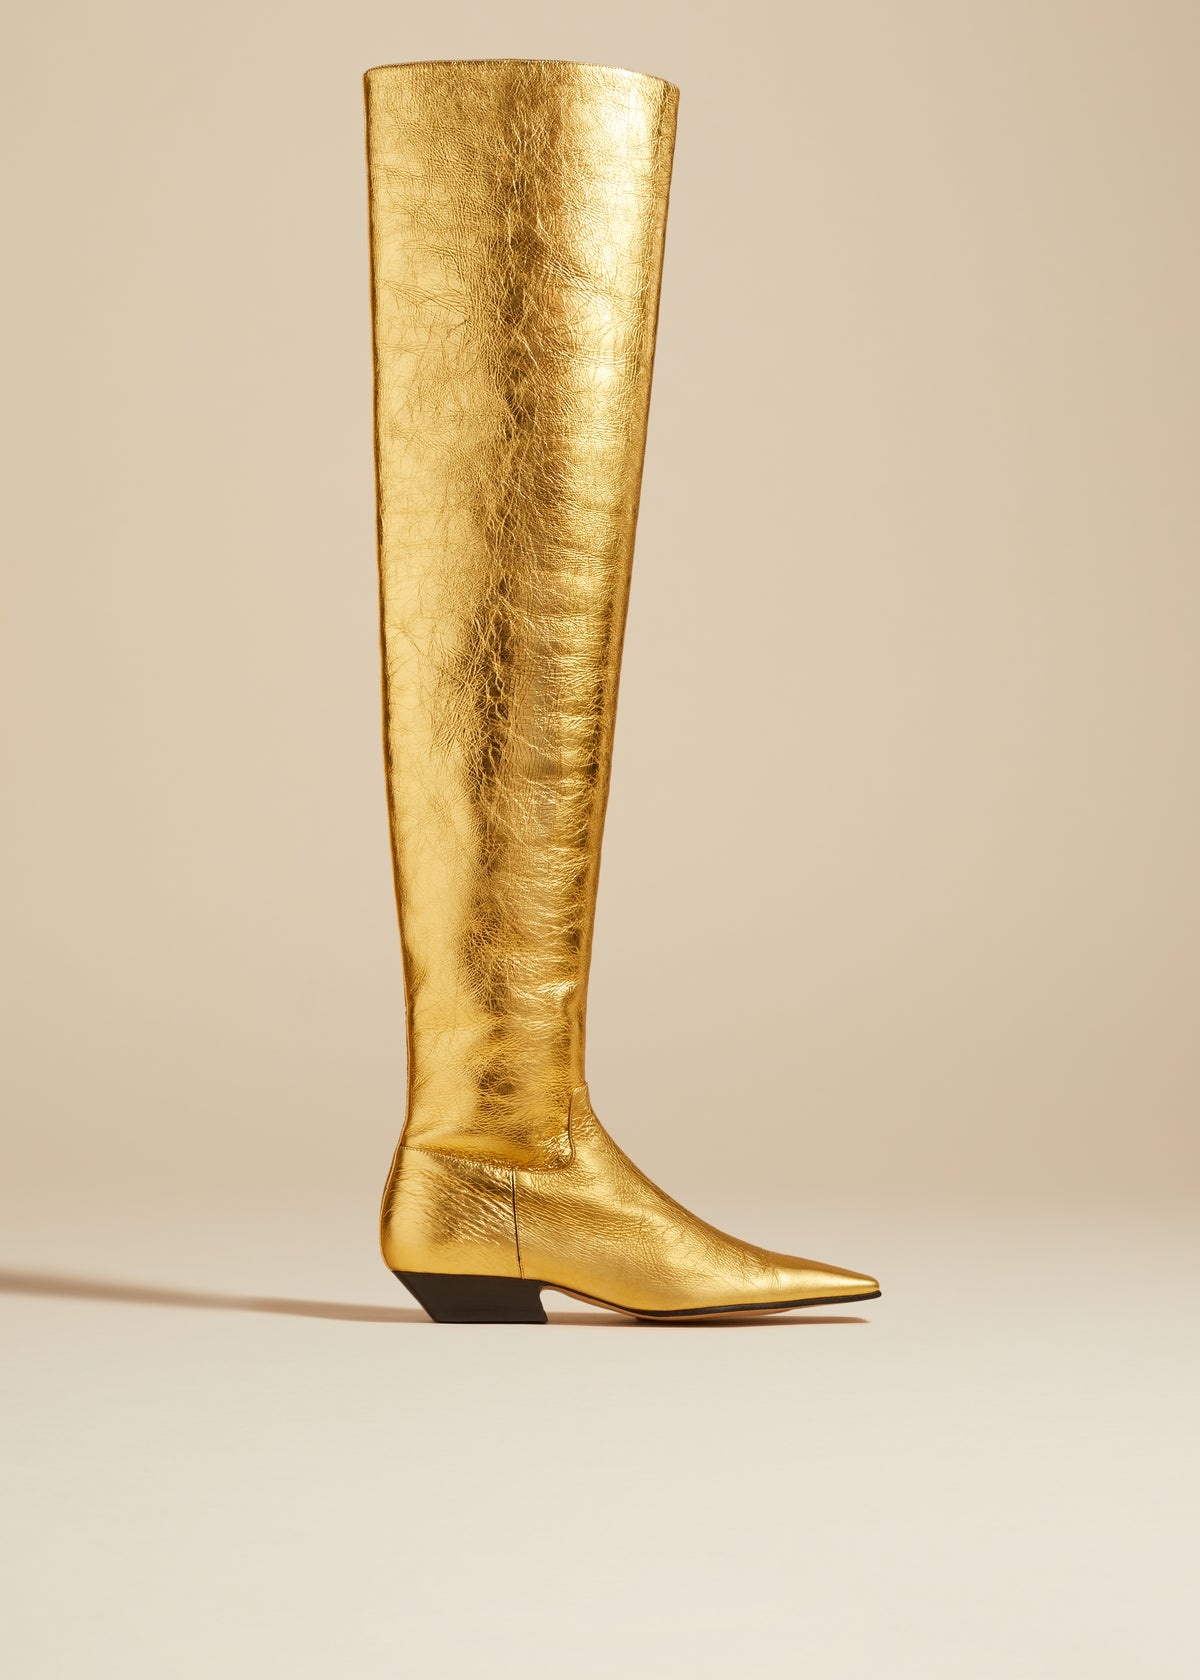 The Marfa Over-the-Knee Flat Boot in Gold Metallic Leather - 1